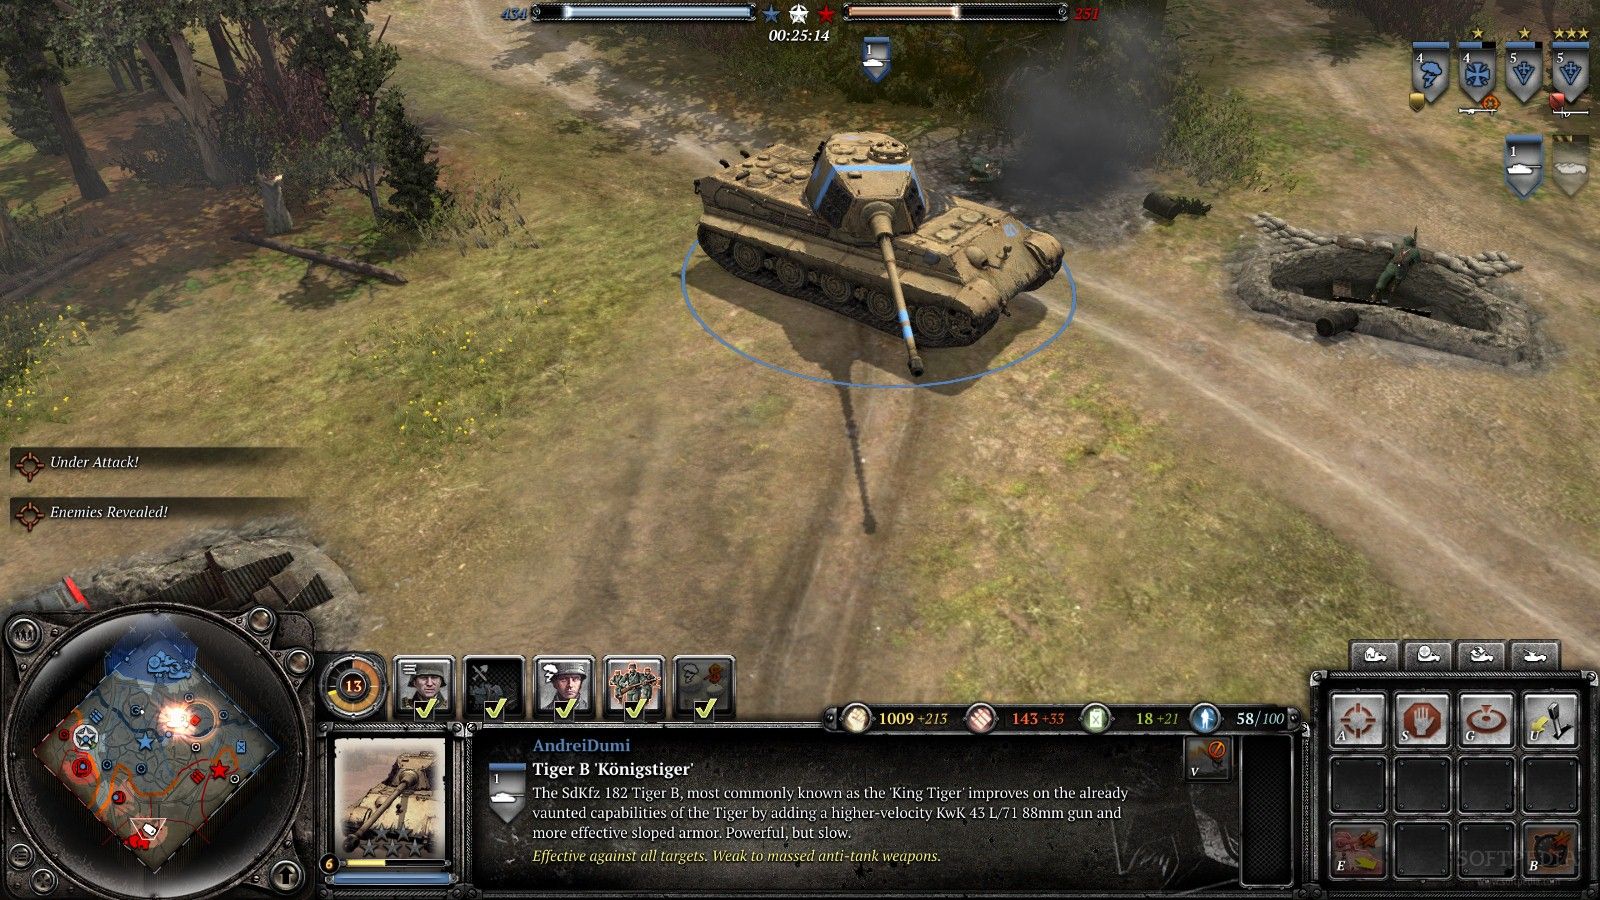 Company of heroes 2 free download torrent pc